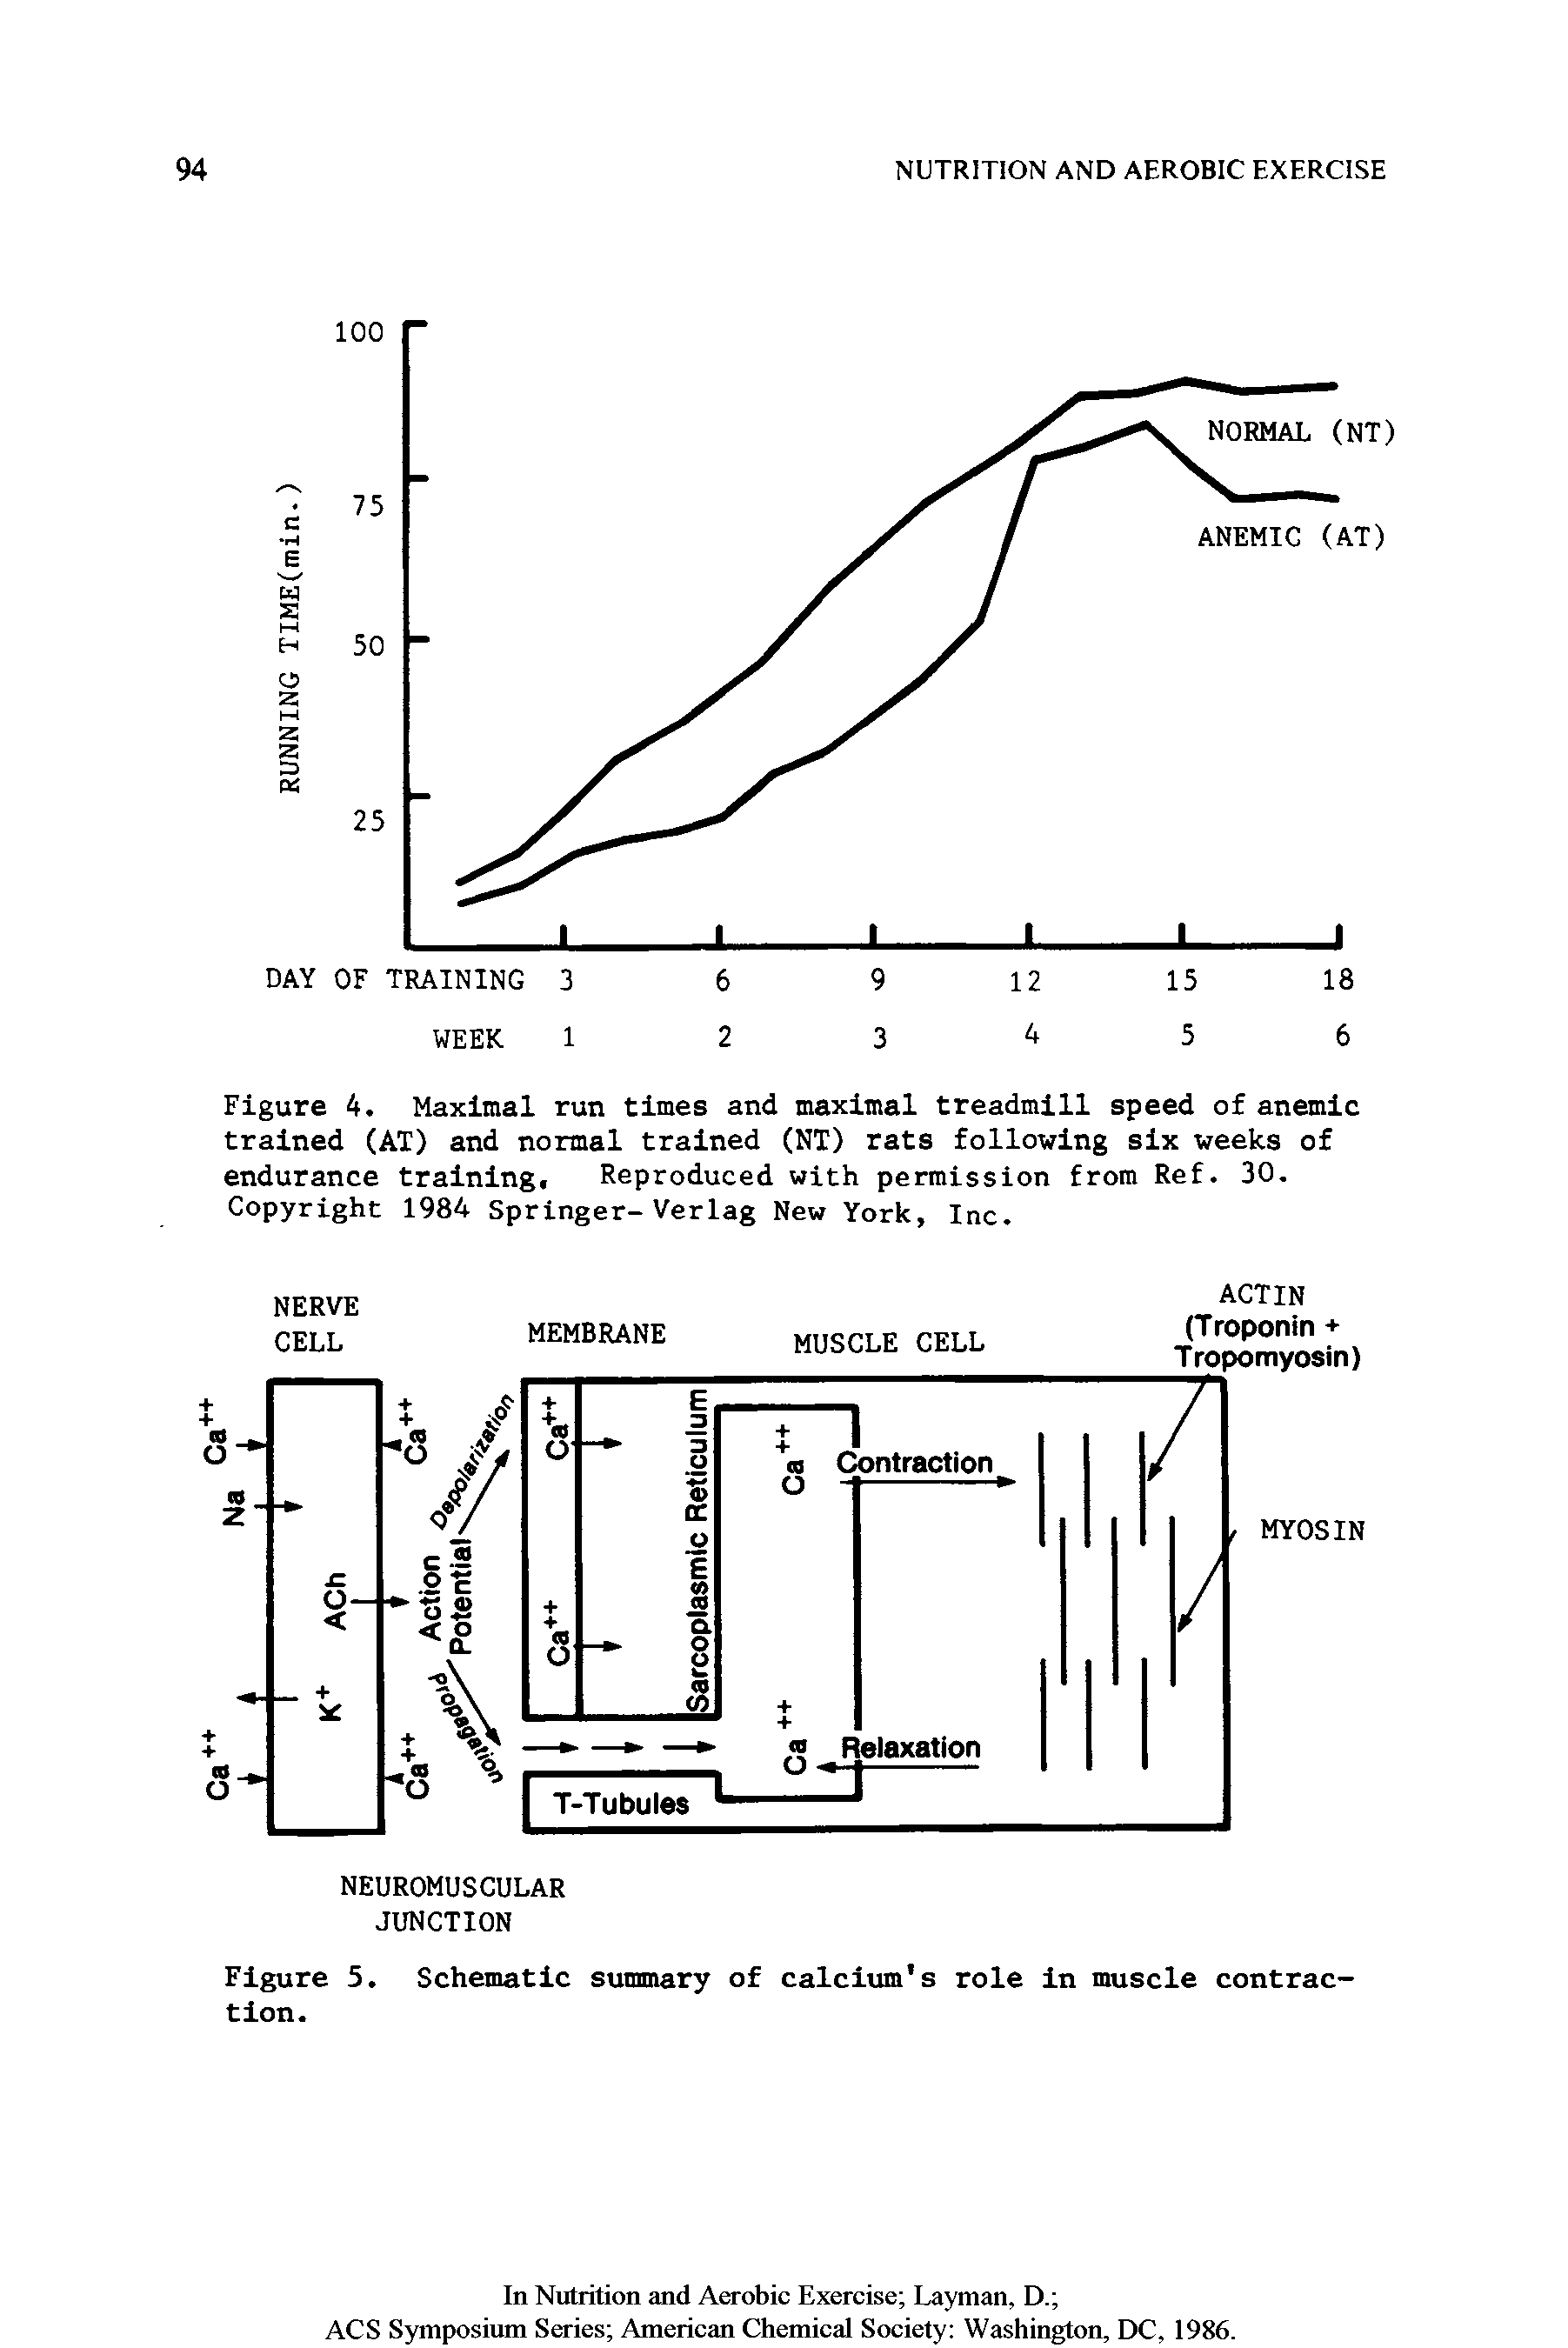 Figure 4. Maximal run times and maximal treadmill speed of anemic trained (AT) and normal trained (NT) rats following six weeks of endurance training. Reproduced with permission from Ref. 30. Copyright 1984 Springer-Verlag New York, Inc.